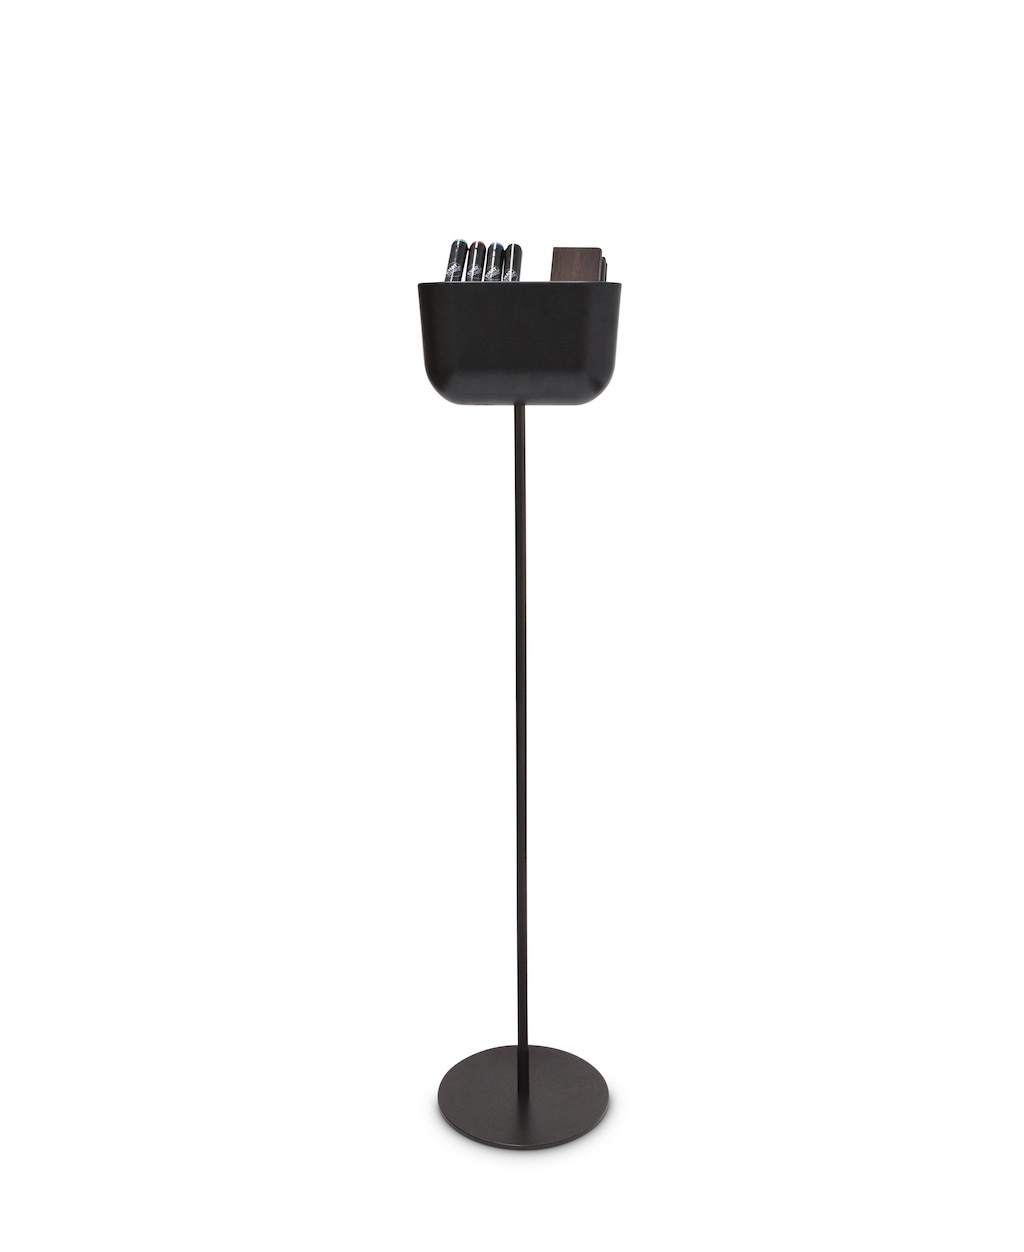 CHAT BOARD®Storage Unit Floor stand